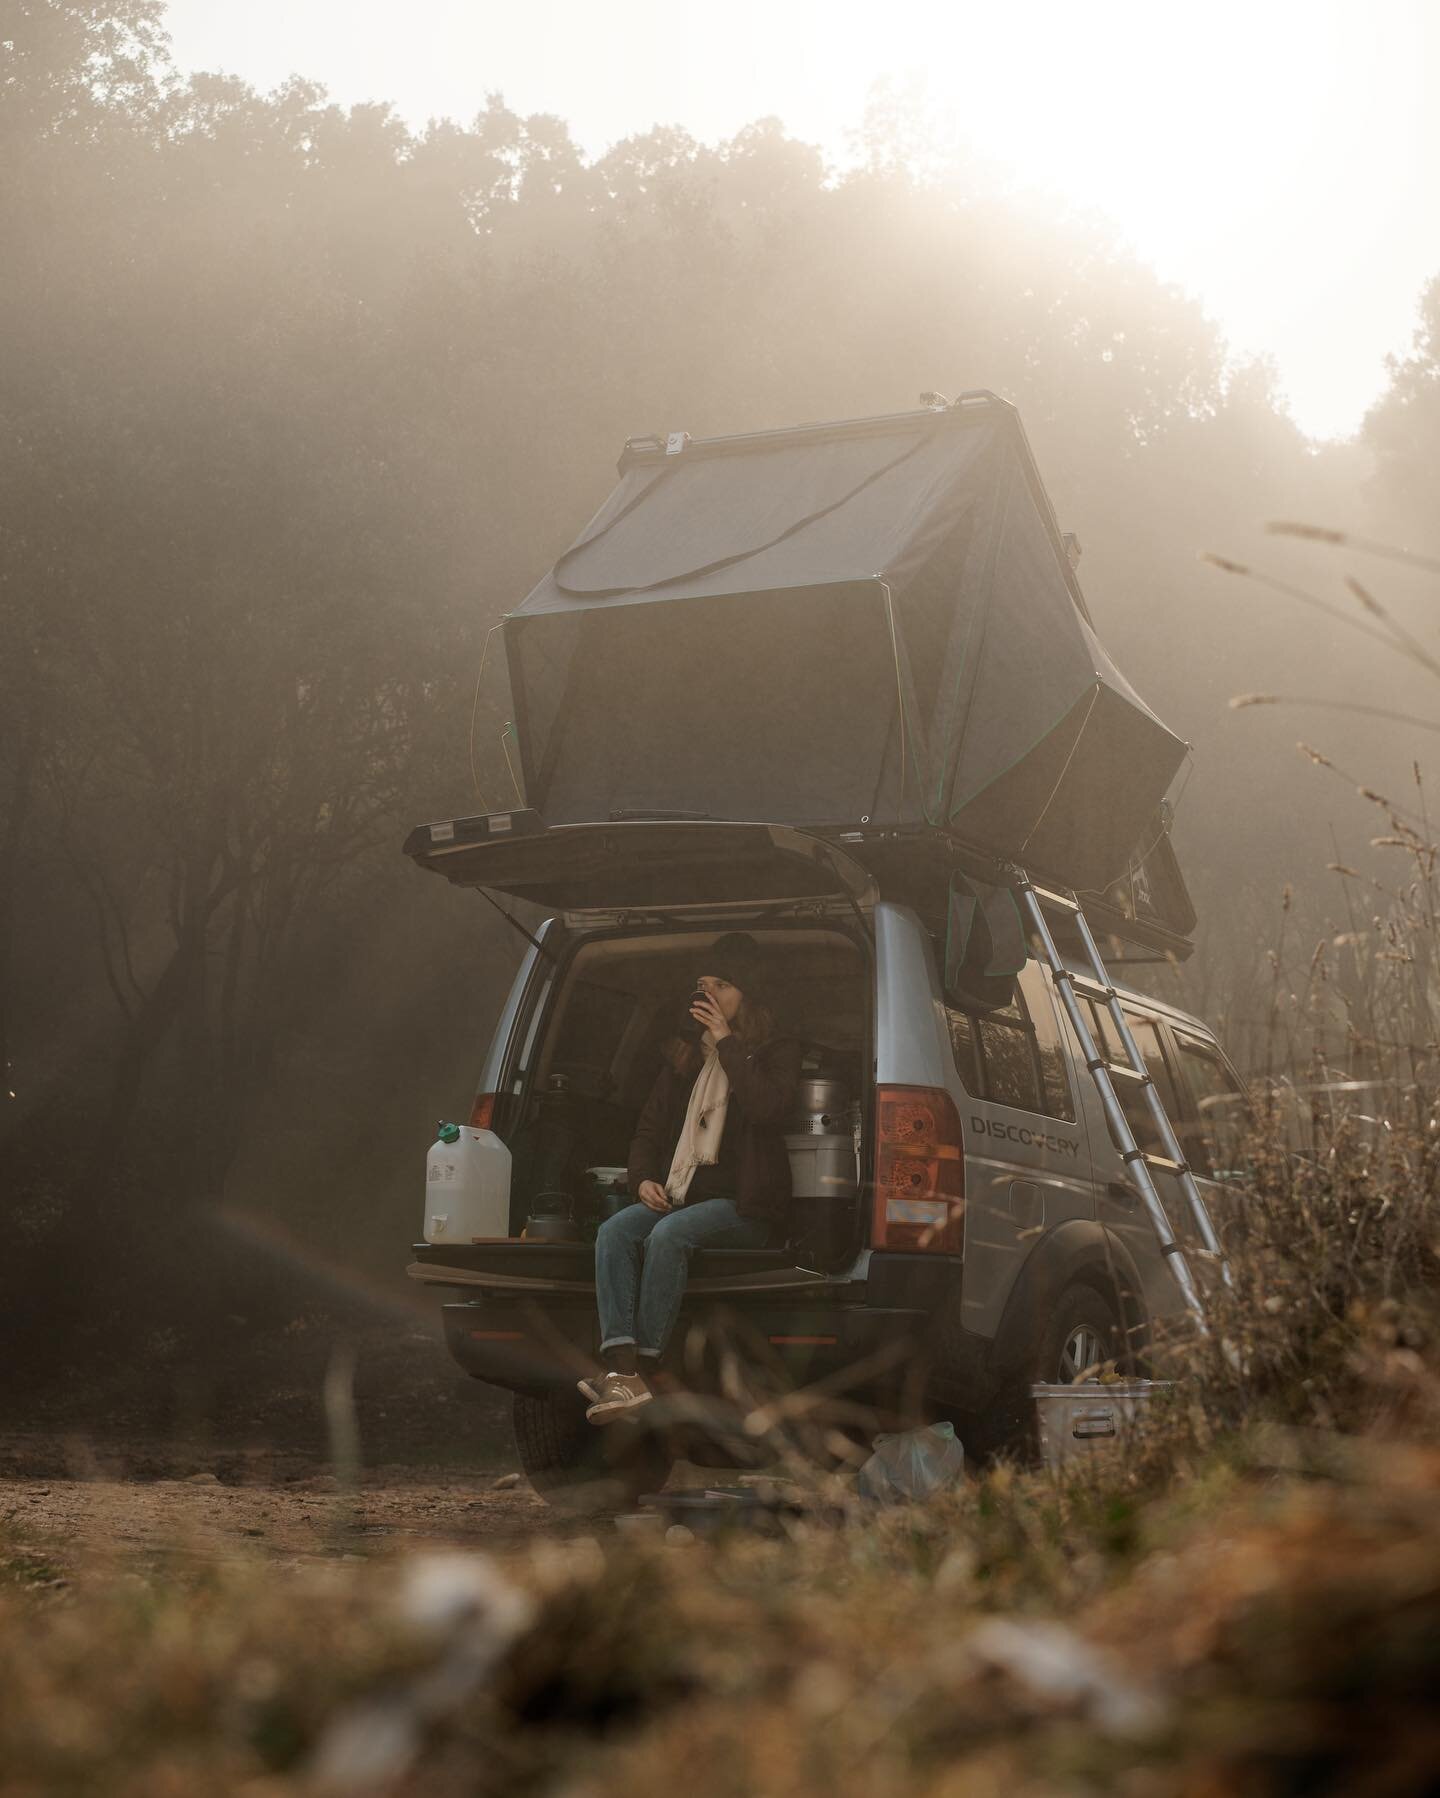 Explore your summer time and go wherever you want🏞
The GEAR ROCK Revelstoke will follow you everywhere🏕

#expedition #adventure #explorer #camping #outdoors #overlanding #roadtrip #getoutside #wilderness #rooftoptent #rooftent #rooftents #rooftentt